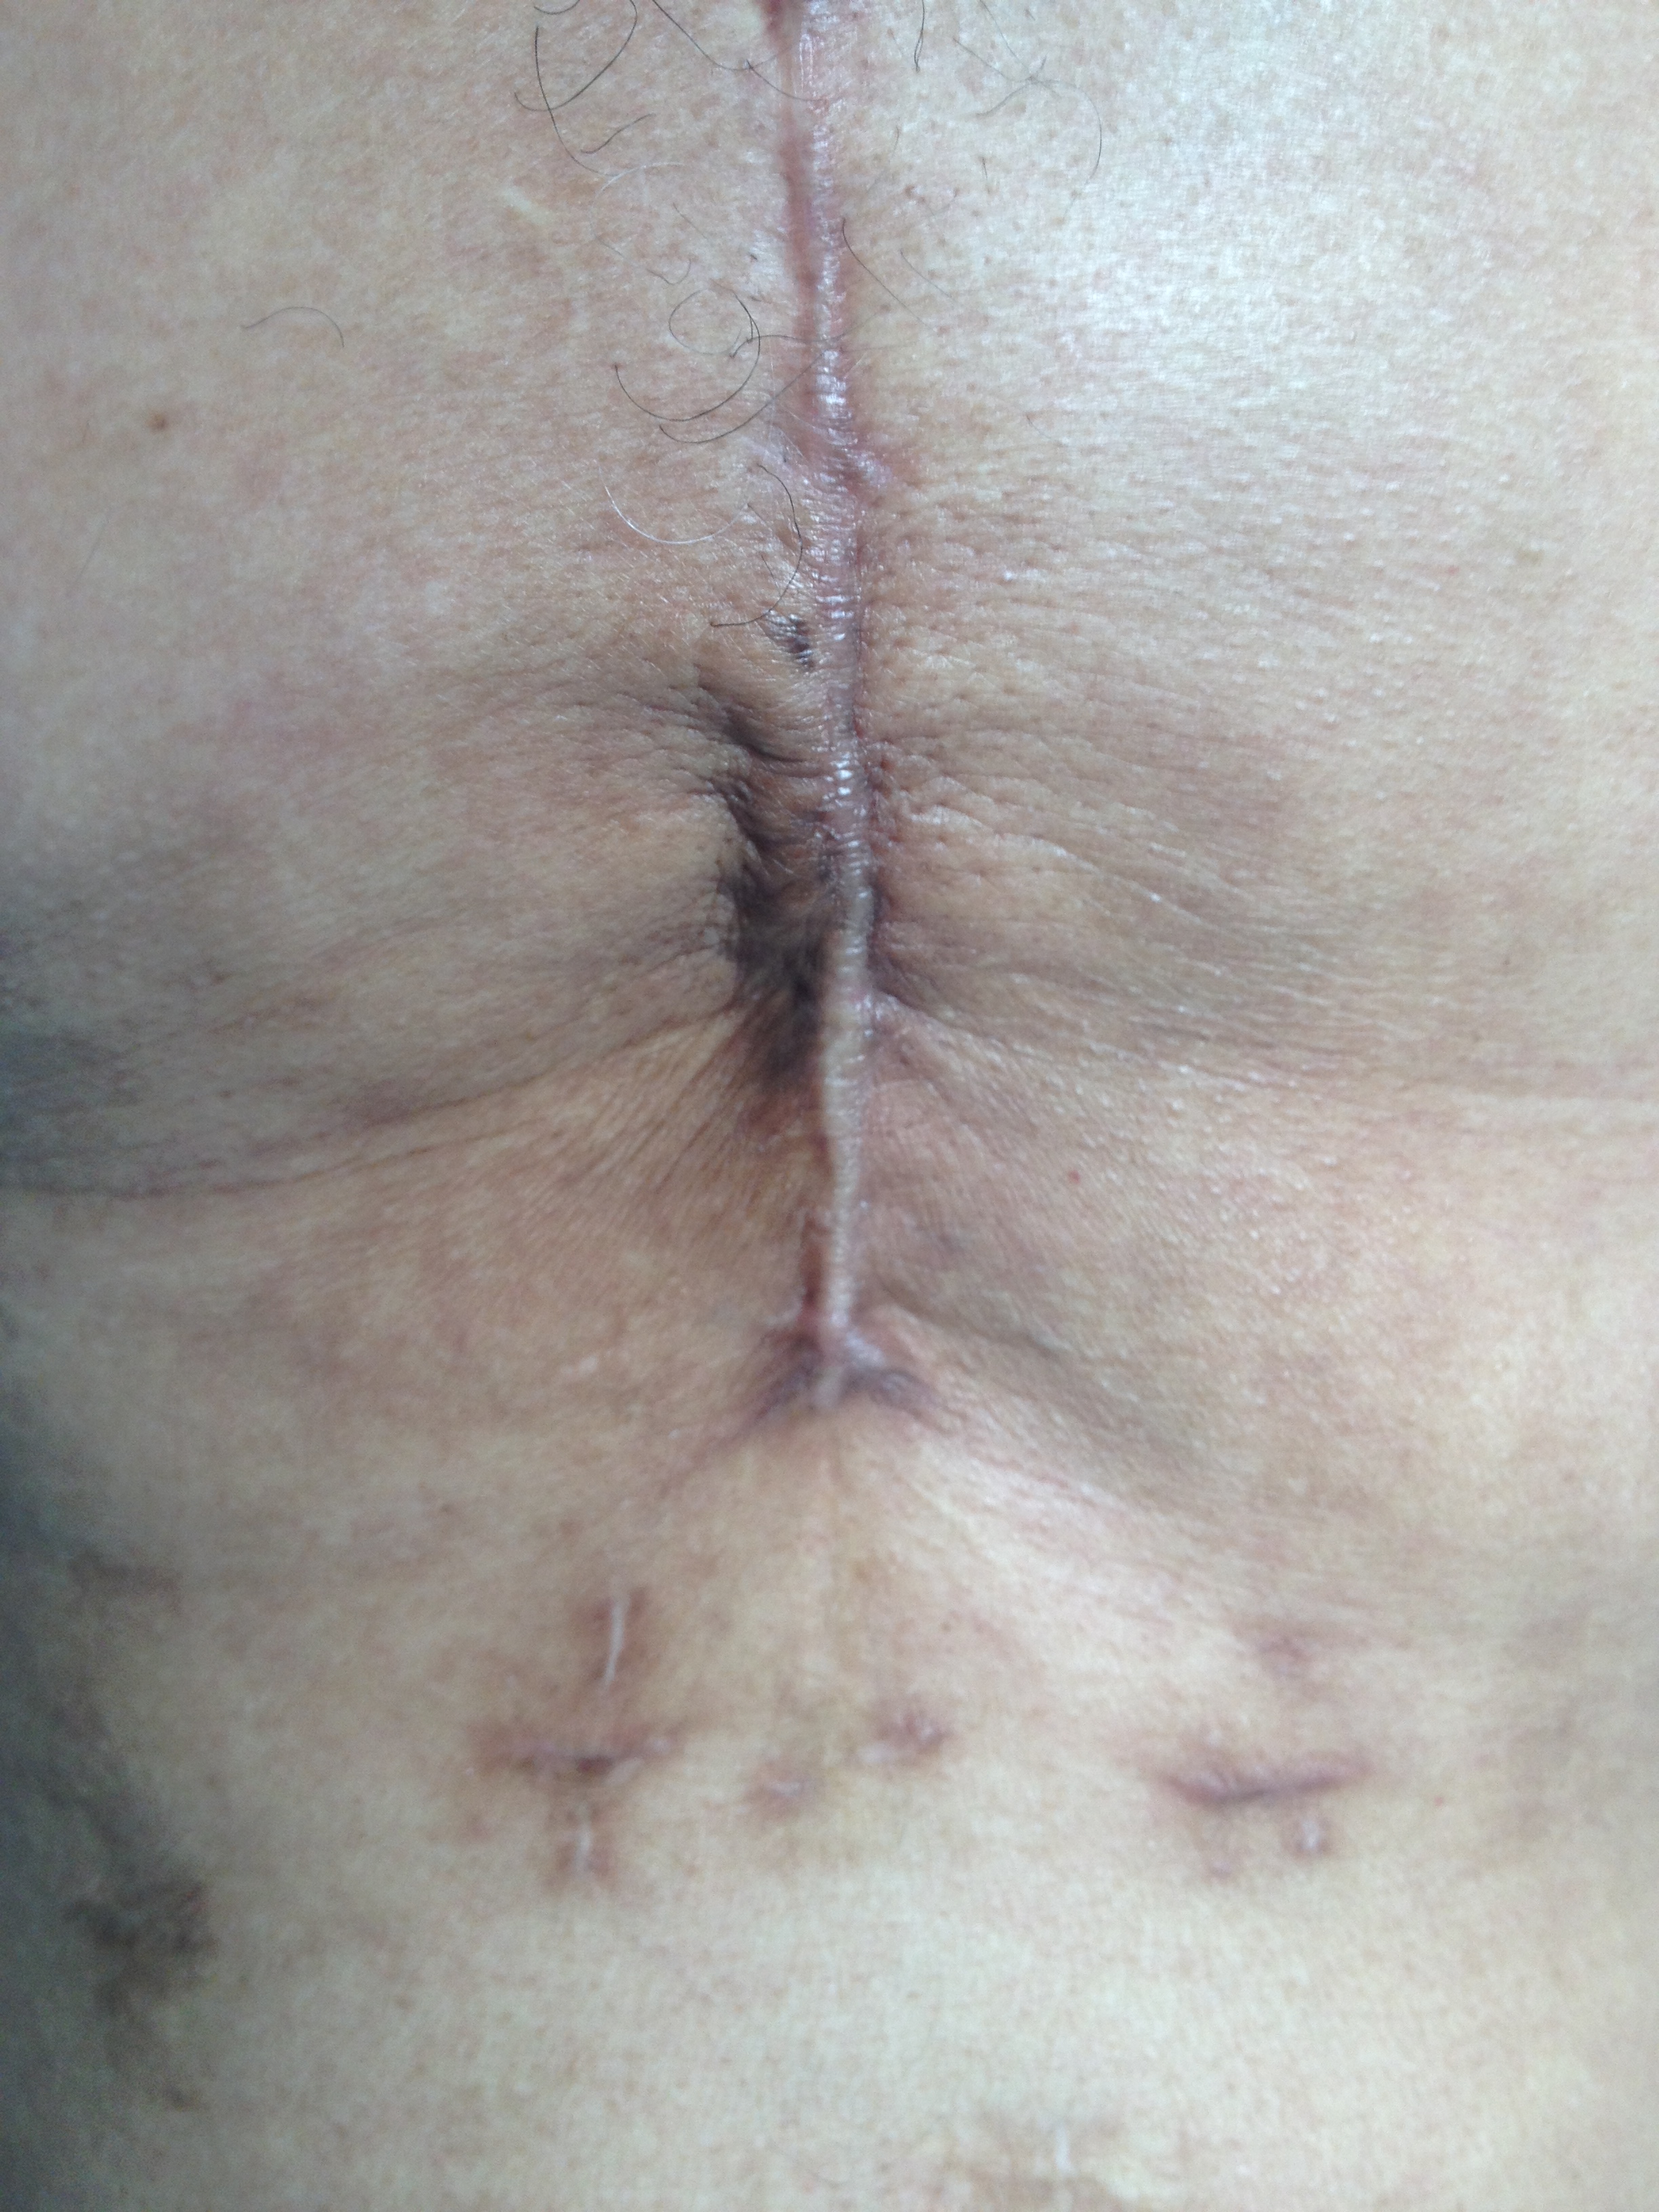 The photo shows a previous sternotomy; the wound has healed and is not infected, but shows a possible evolution in a hypertrophic scar.